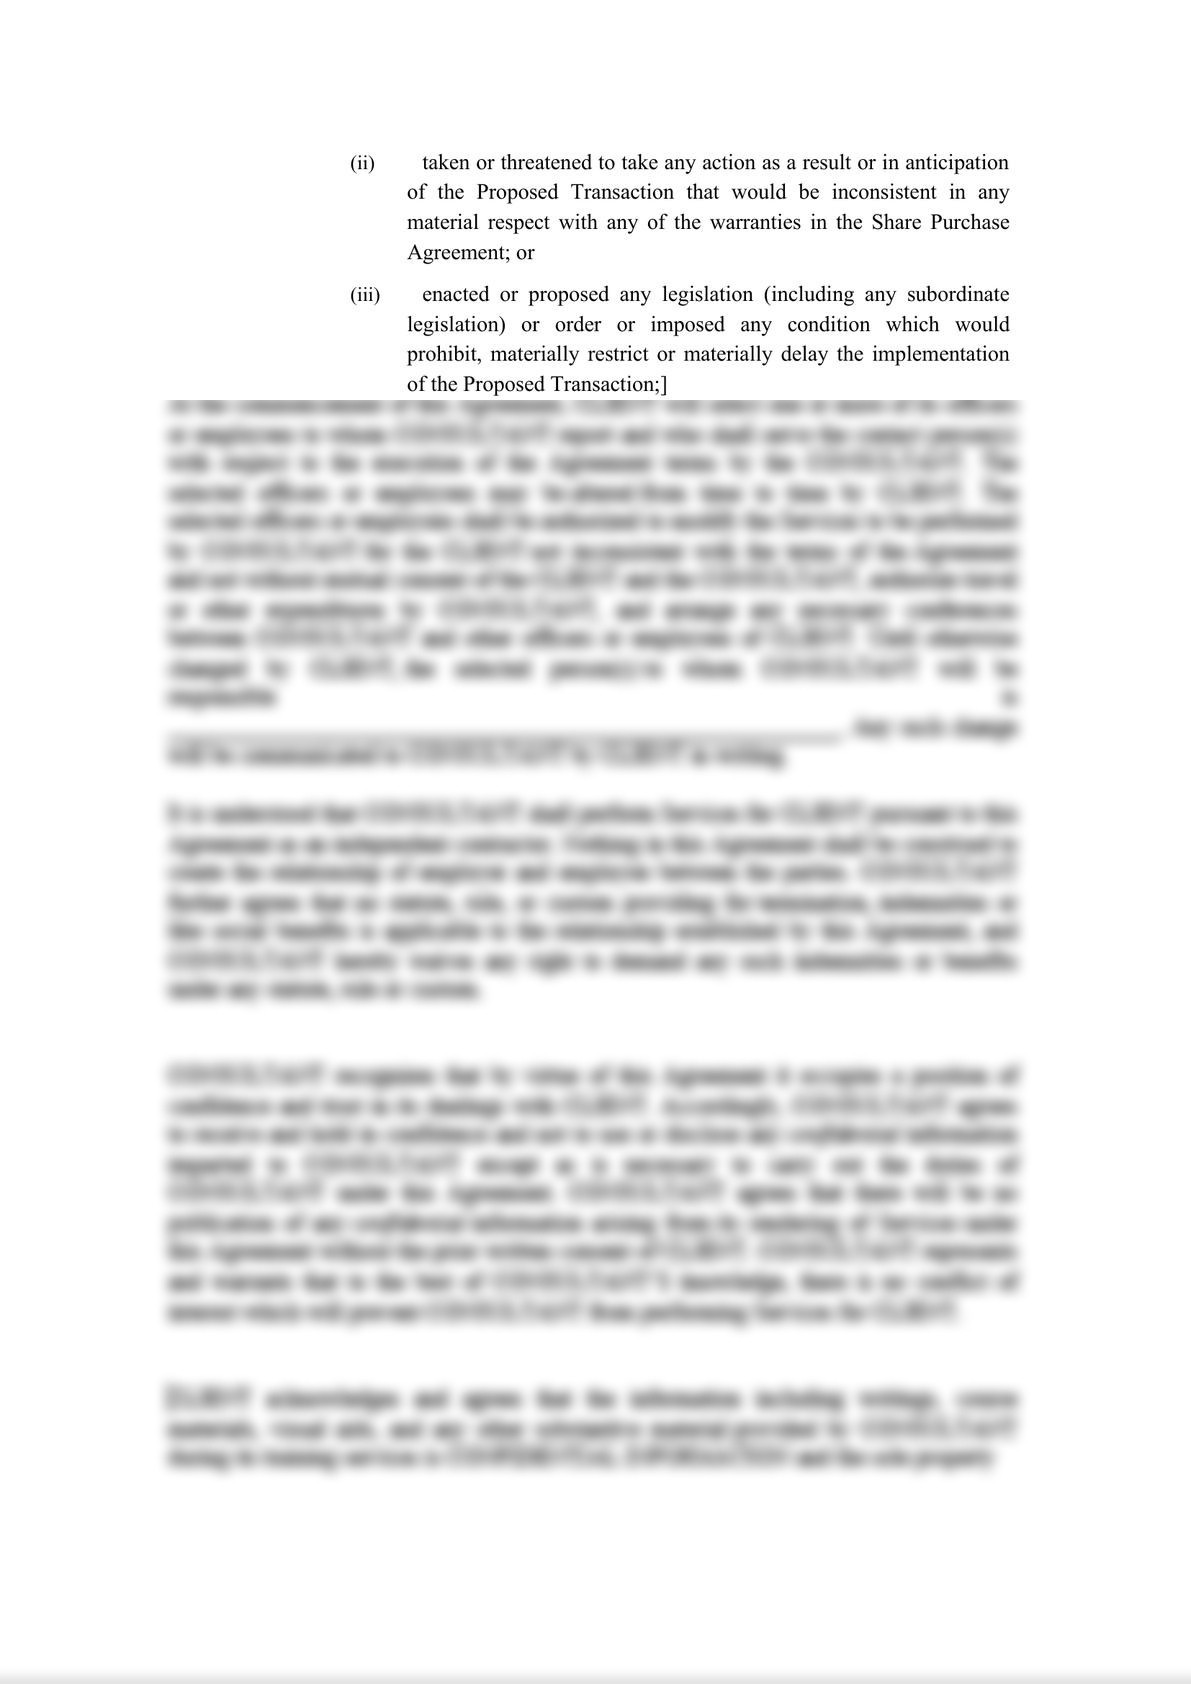 Letter of Intent-International Acquisition (M&A)-4